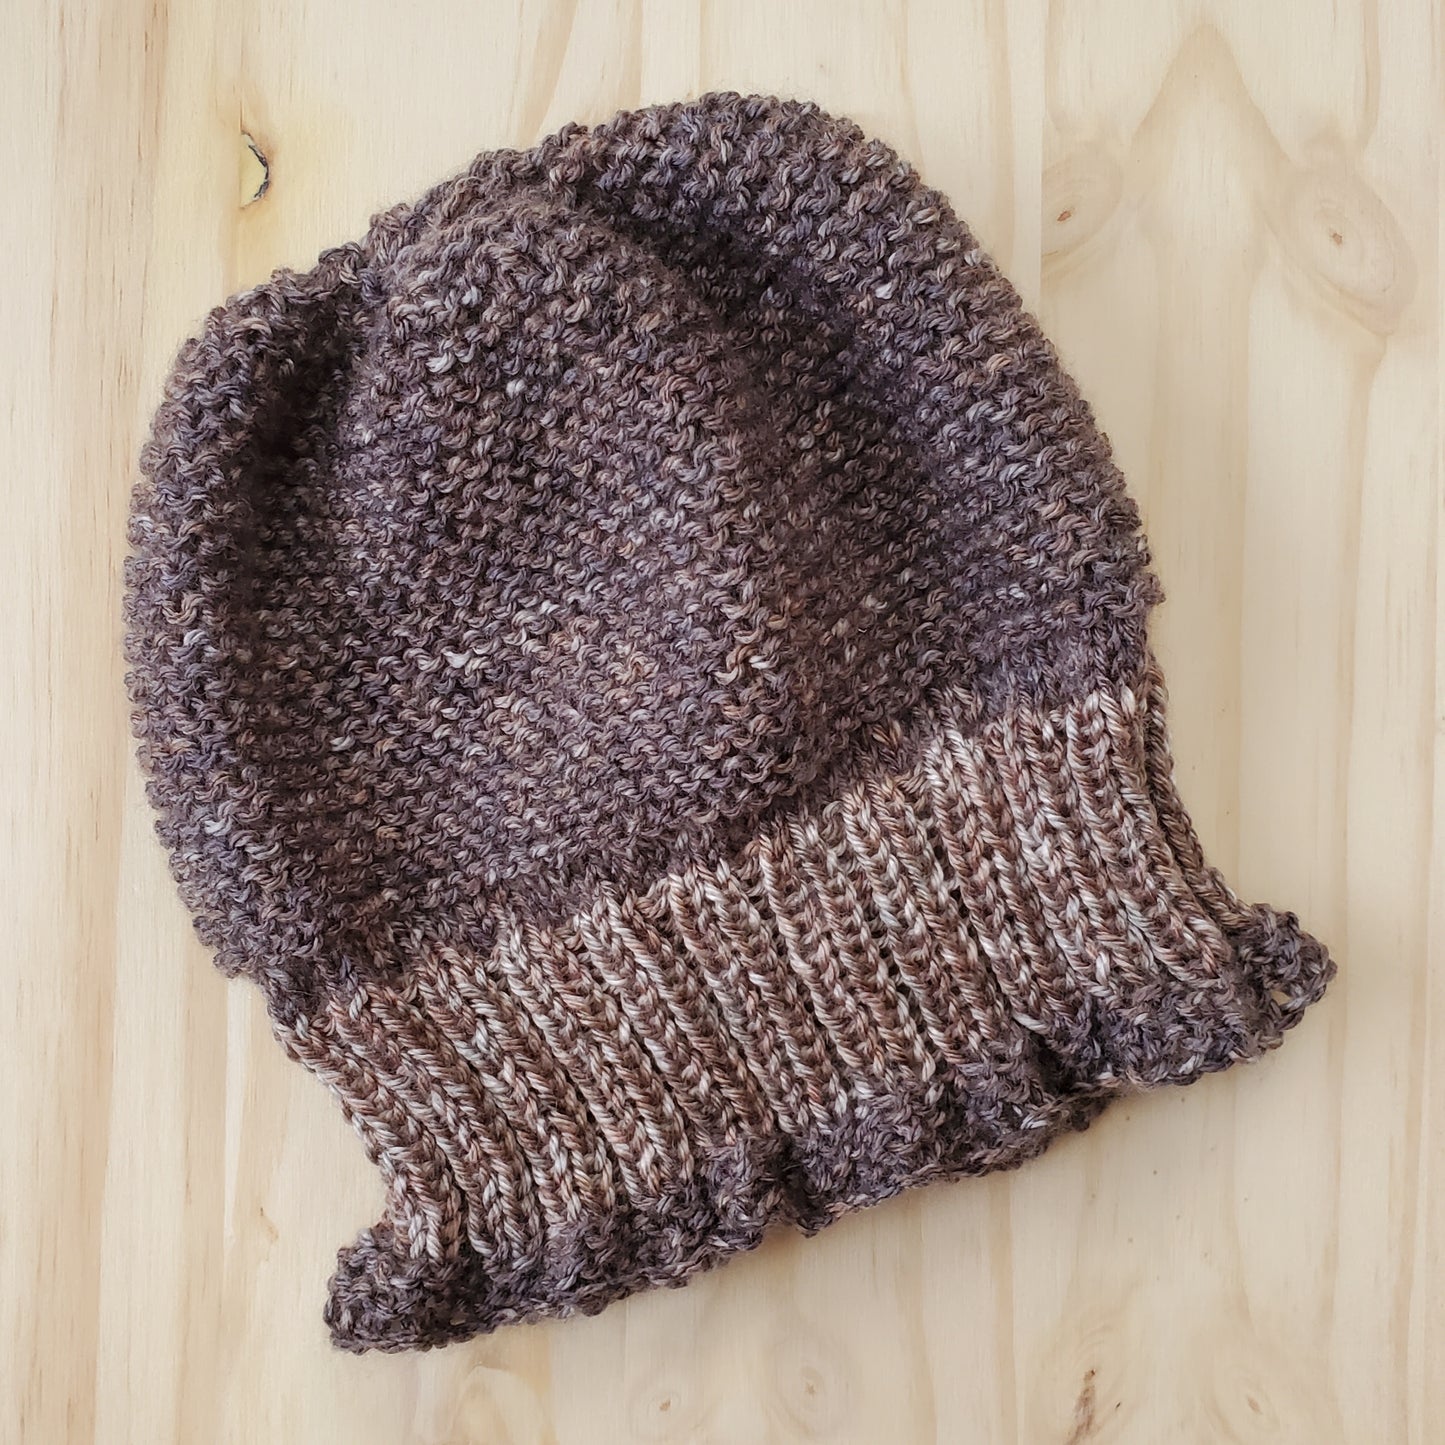 Knit Baby Beanies-Accessories-in2ition mercantile